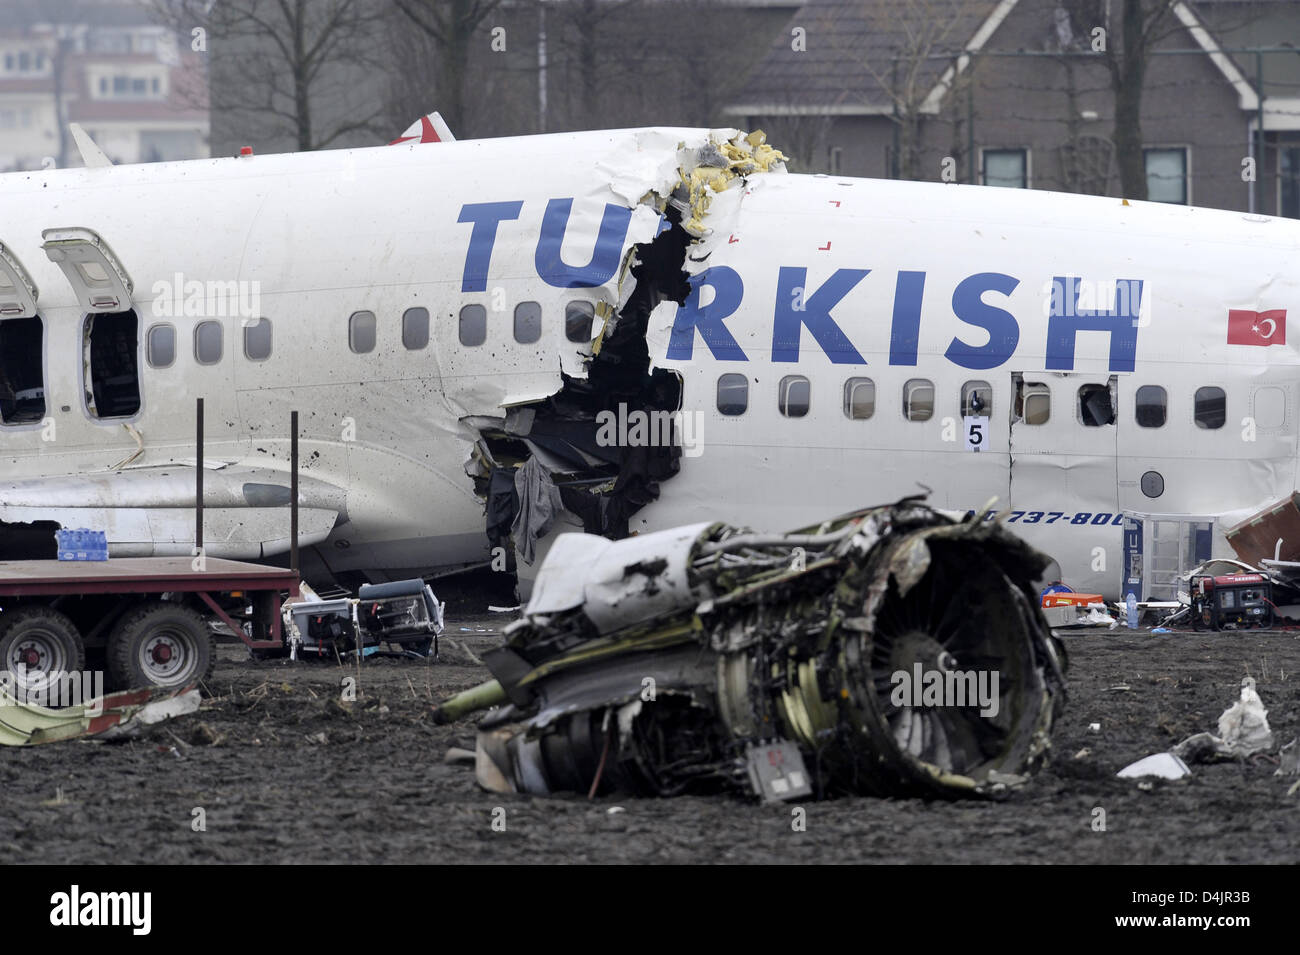 The wreckage of the crashed airplane lies in a field in Amsterdam, Netherlands, 25 February 2009. The plane by Turkish Airways has crashed on landing at Amsterdam?s Schiphol international airport, killing nine people and injuring more than 50 of the 134 passengers. The reasons for the crash are yet unclear. Photo: Achim Scheidemann Stock Photo